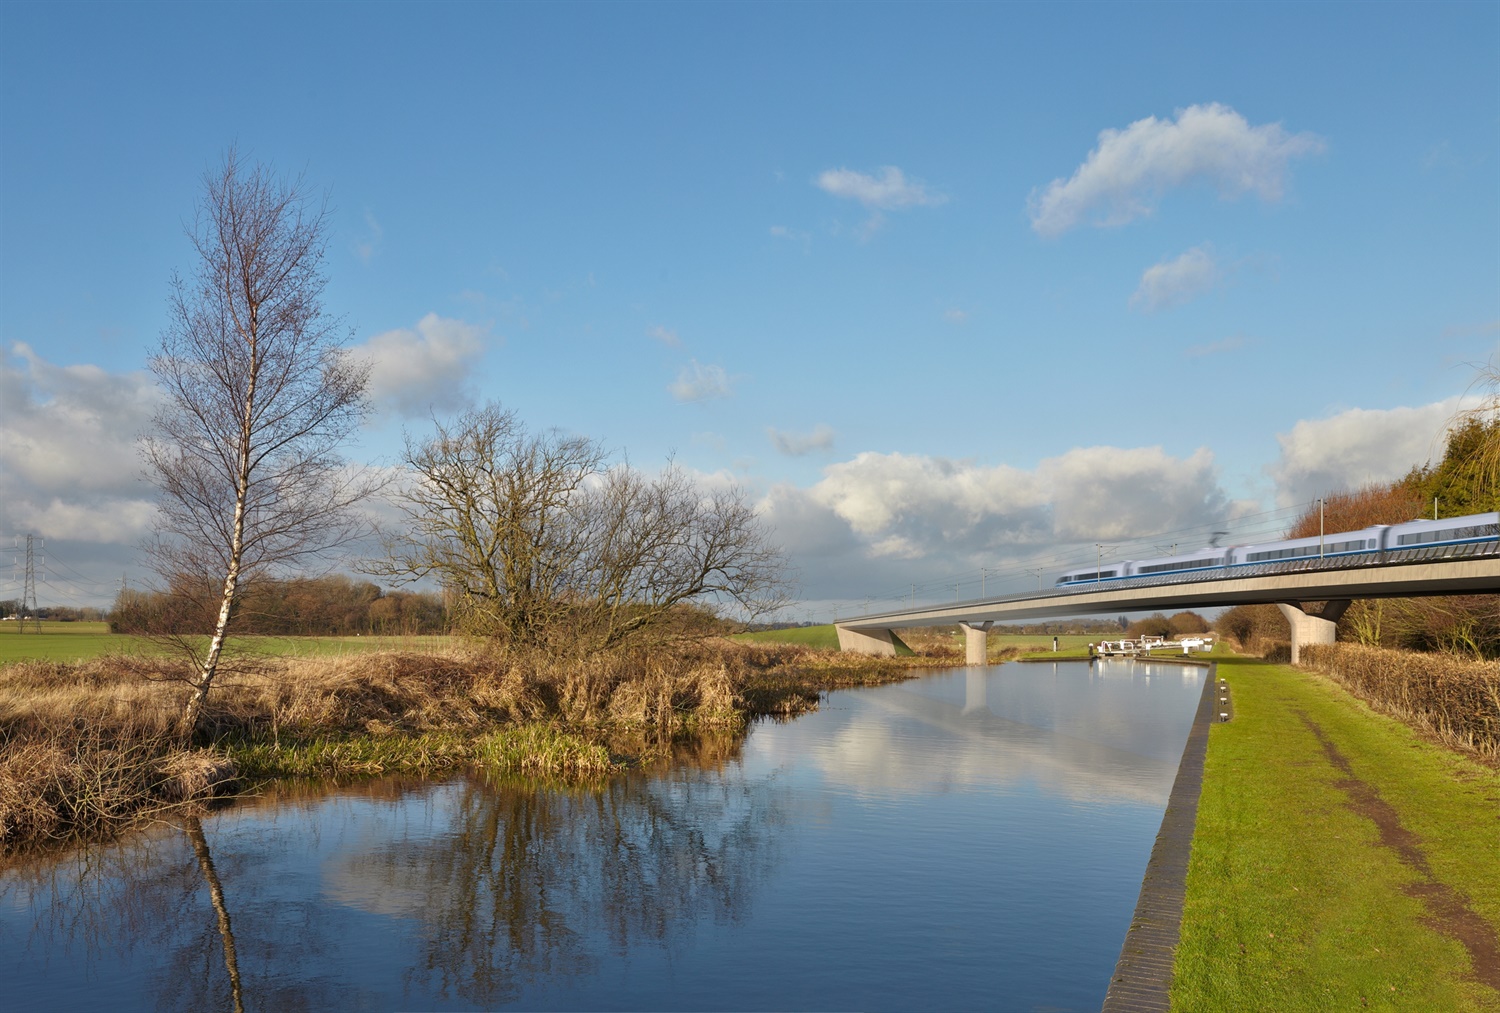 HS2 announces shortlist for phase 2 consultant contracts worth £520m